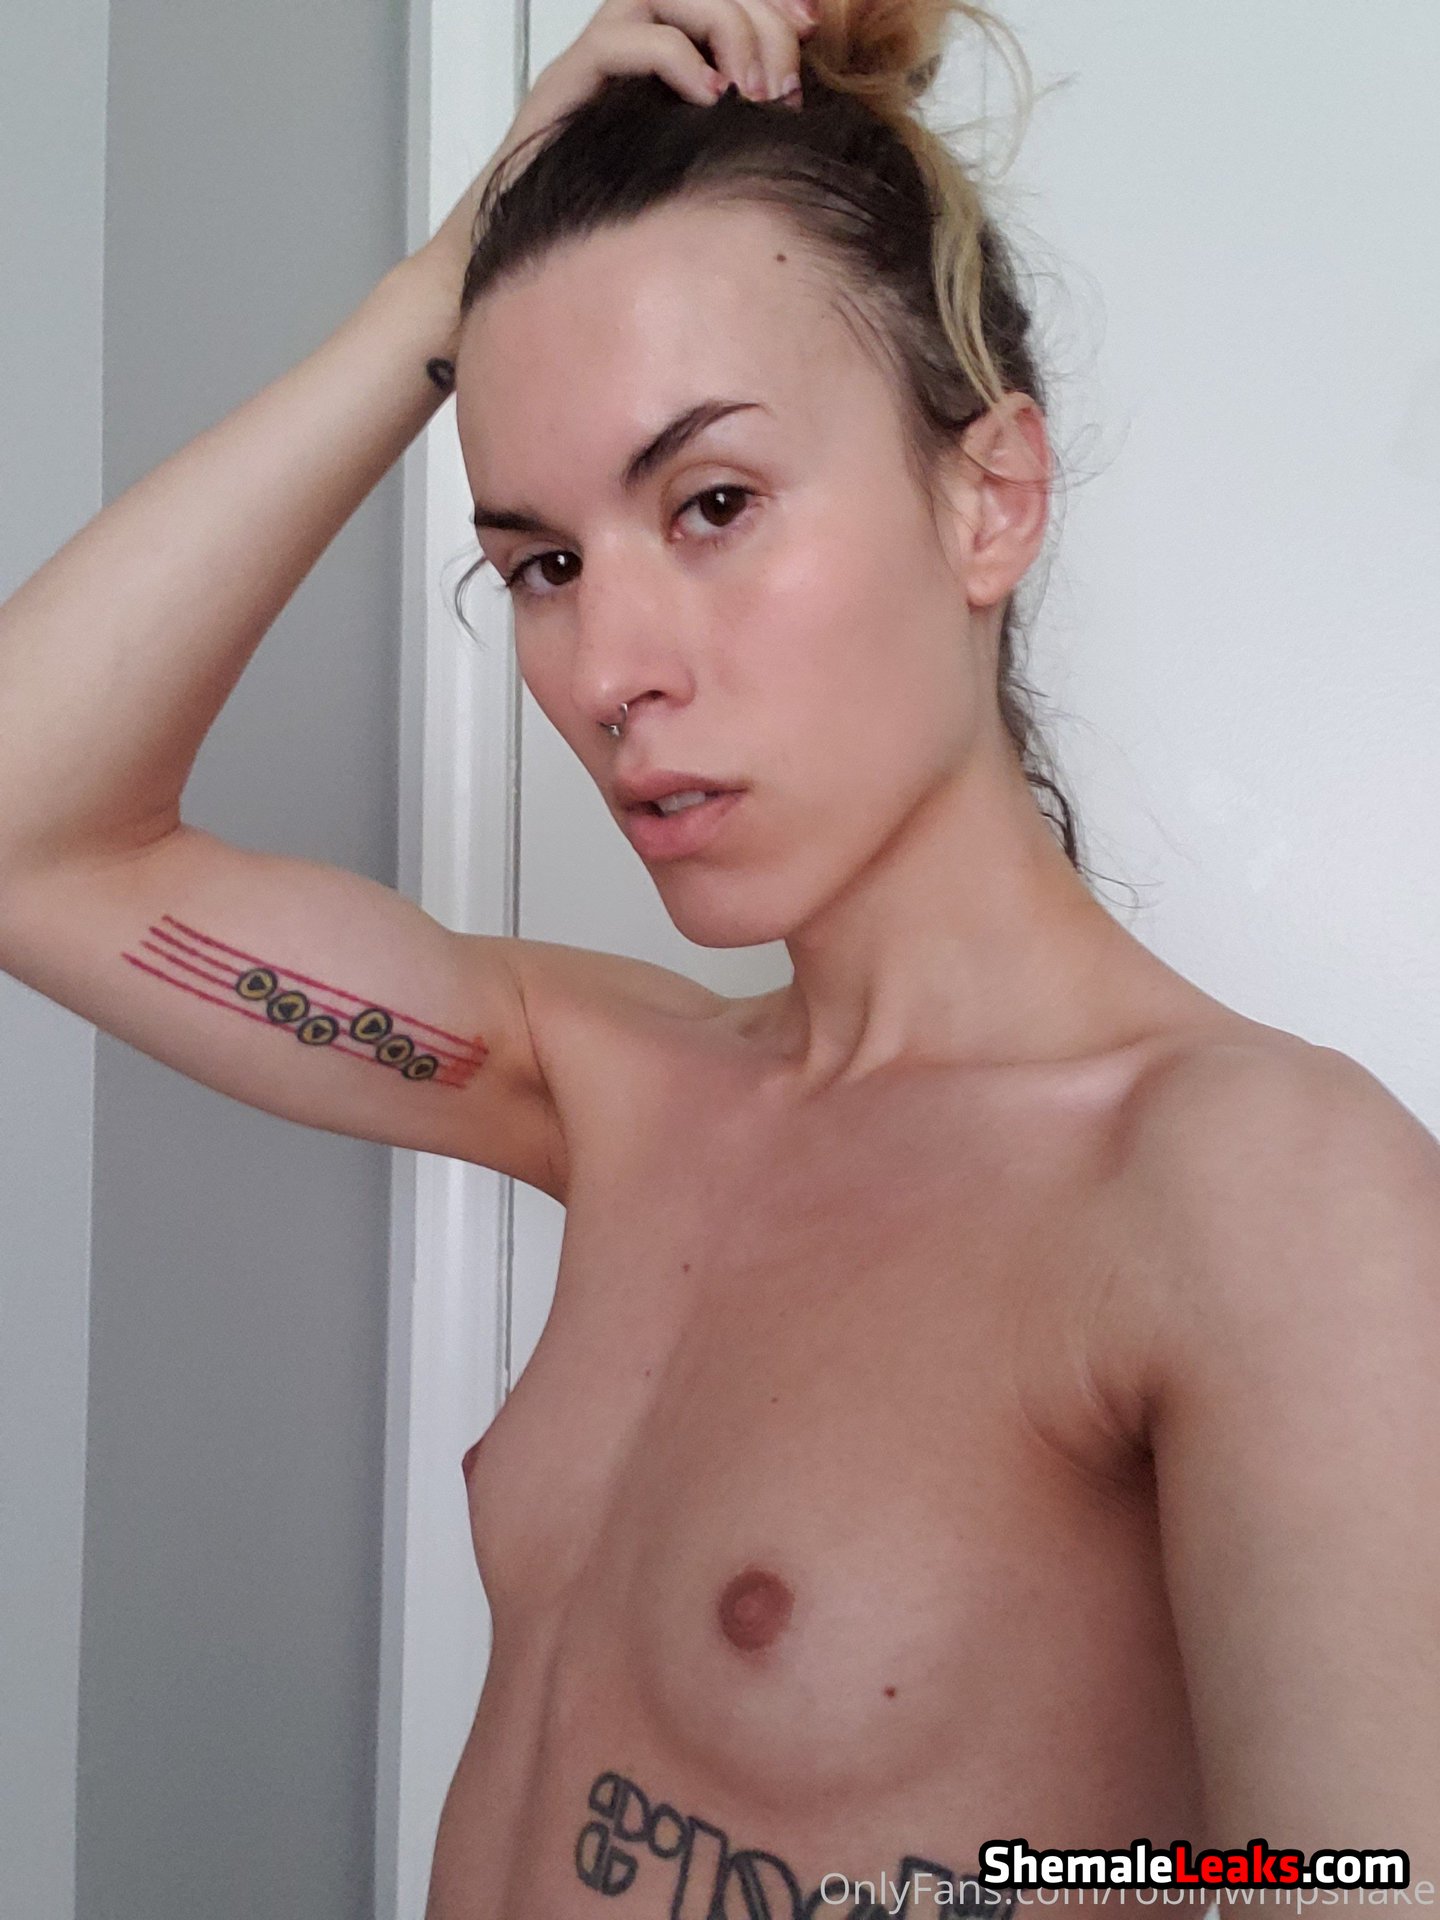 RobinWhipSnake OnlyFans Leaks (95 Photos and 9 Videos)